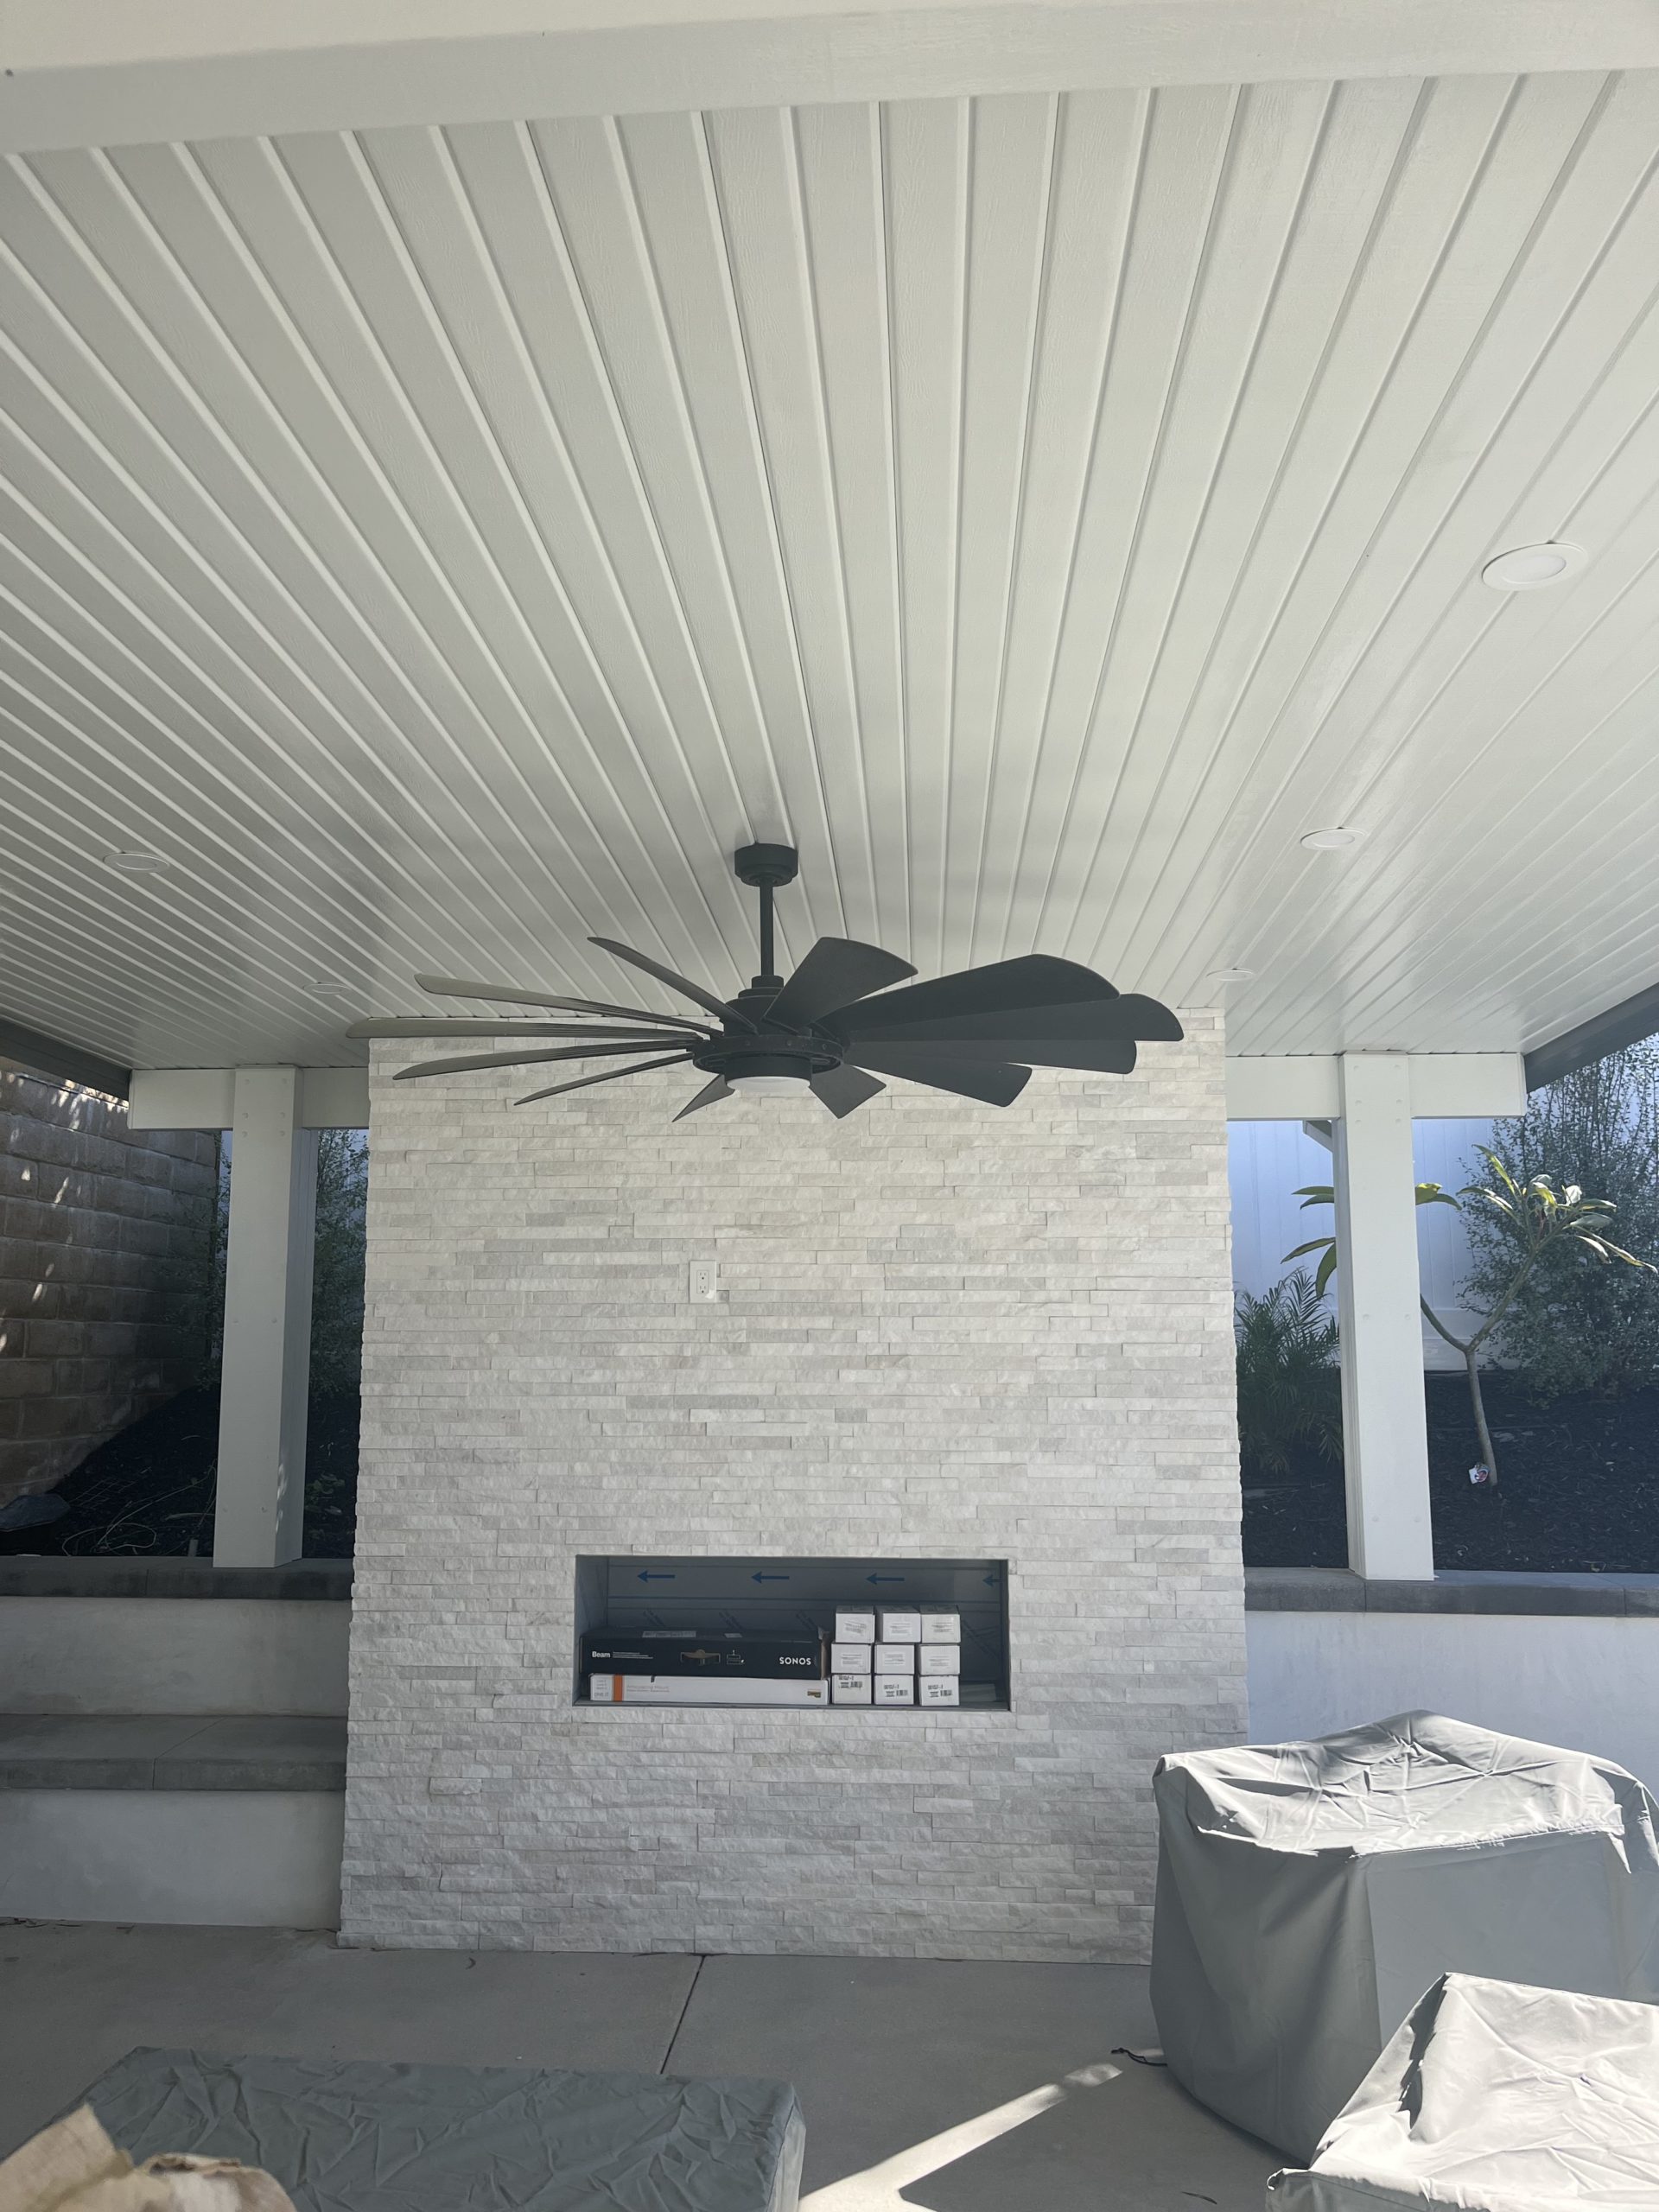 Alumawood Patio Cover Company the Best in Orange County